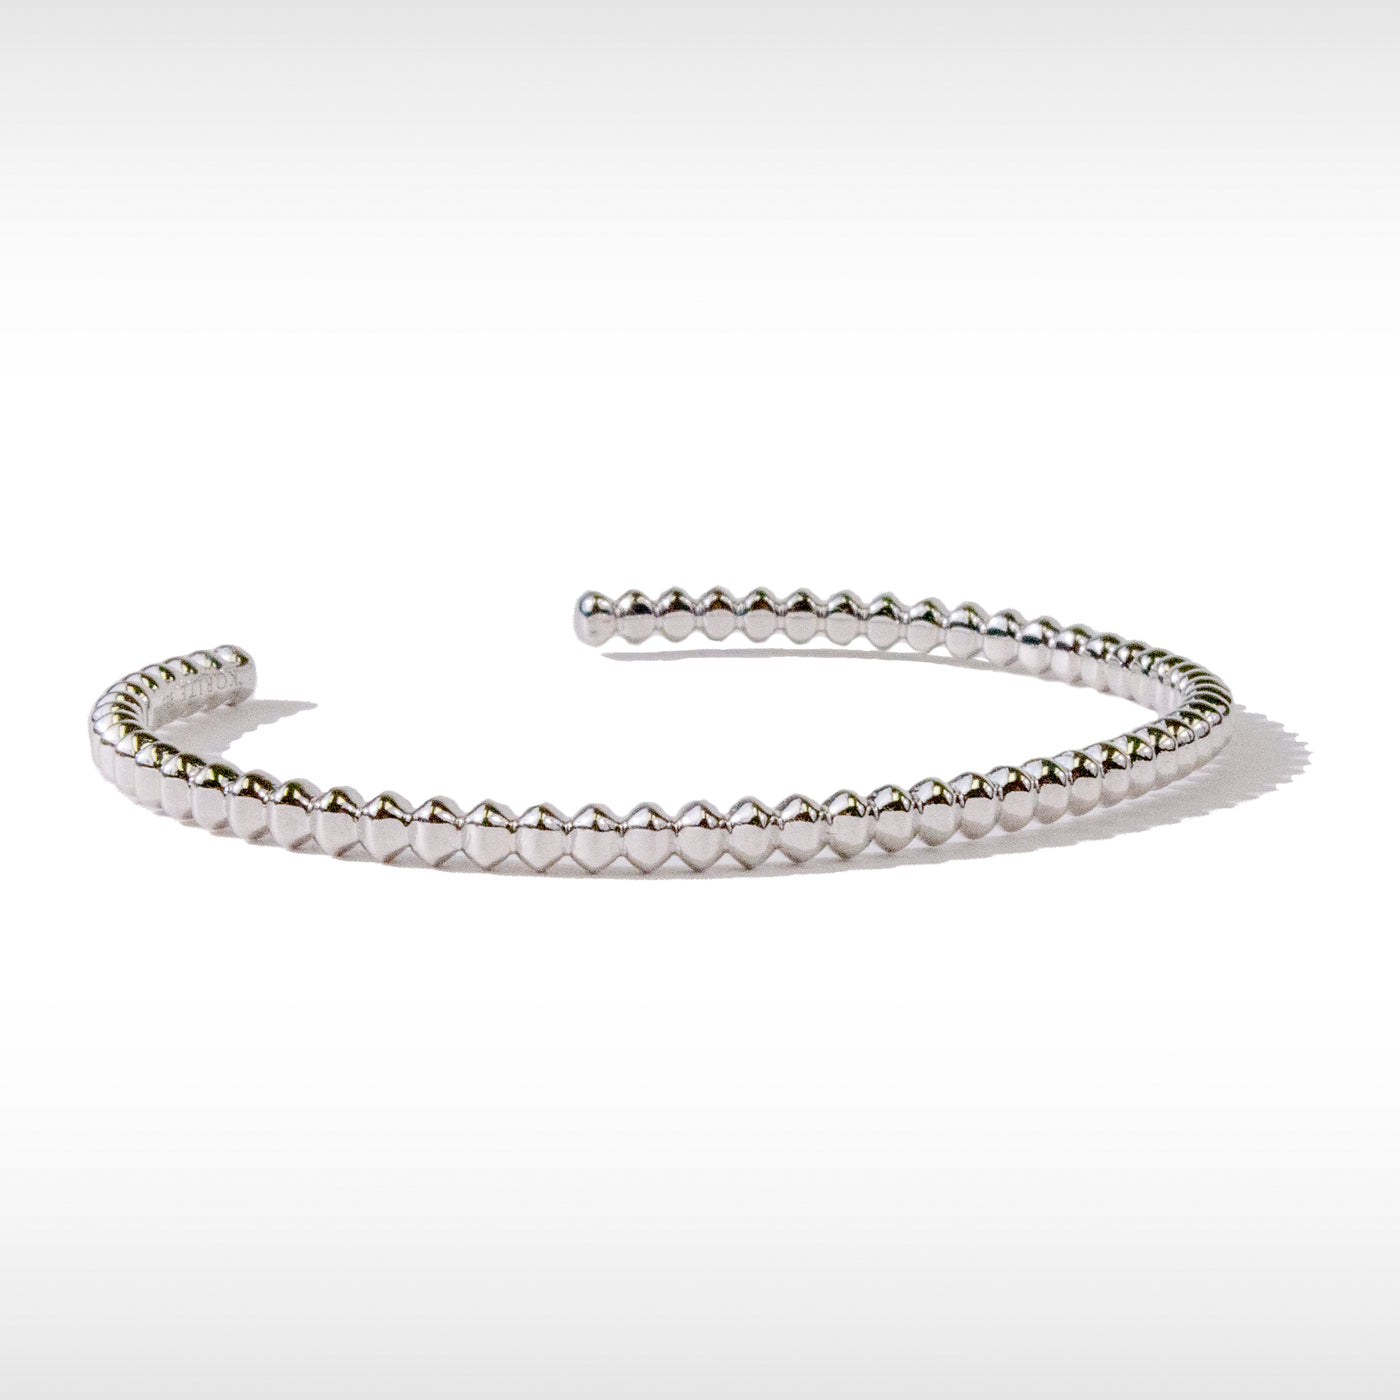 Accents bangle in sterling silver with rhodium plating